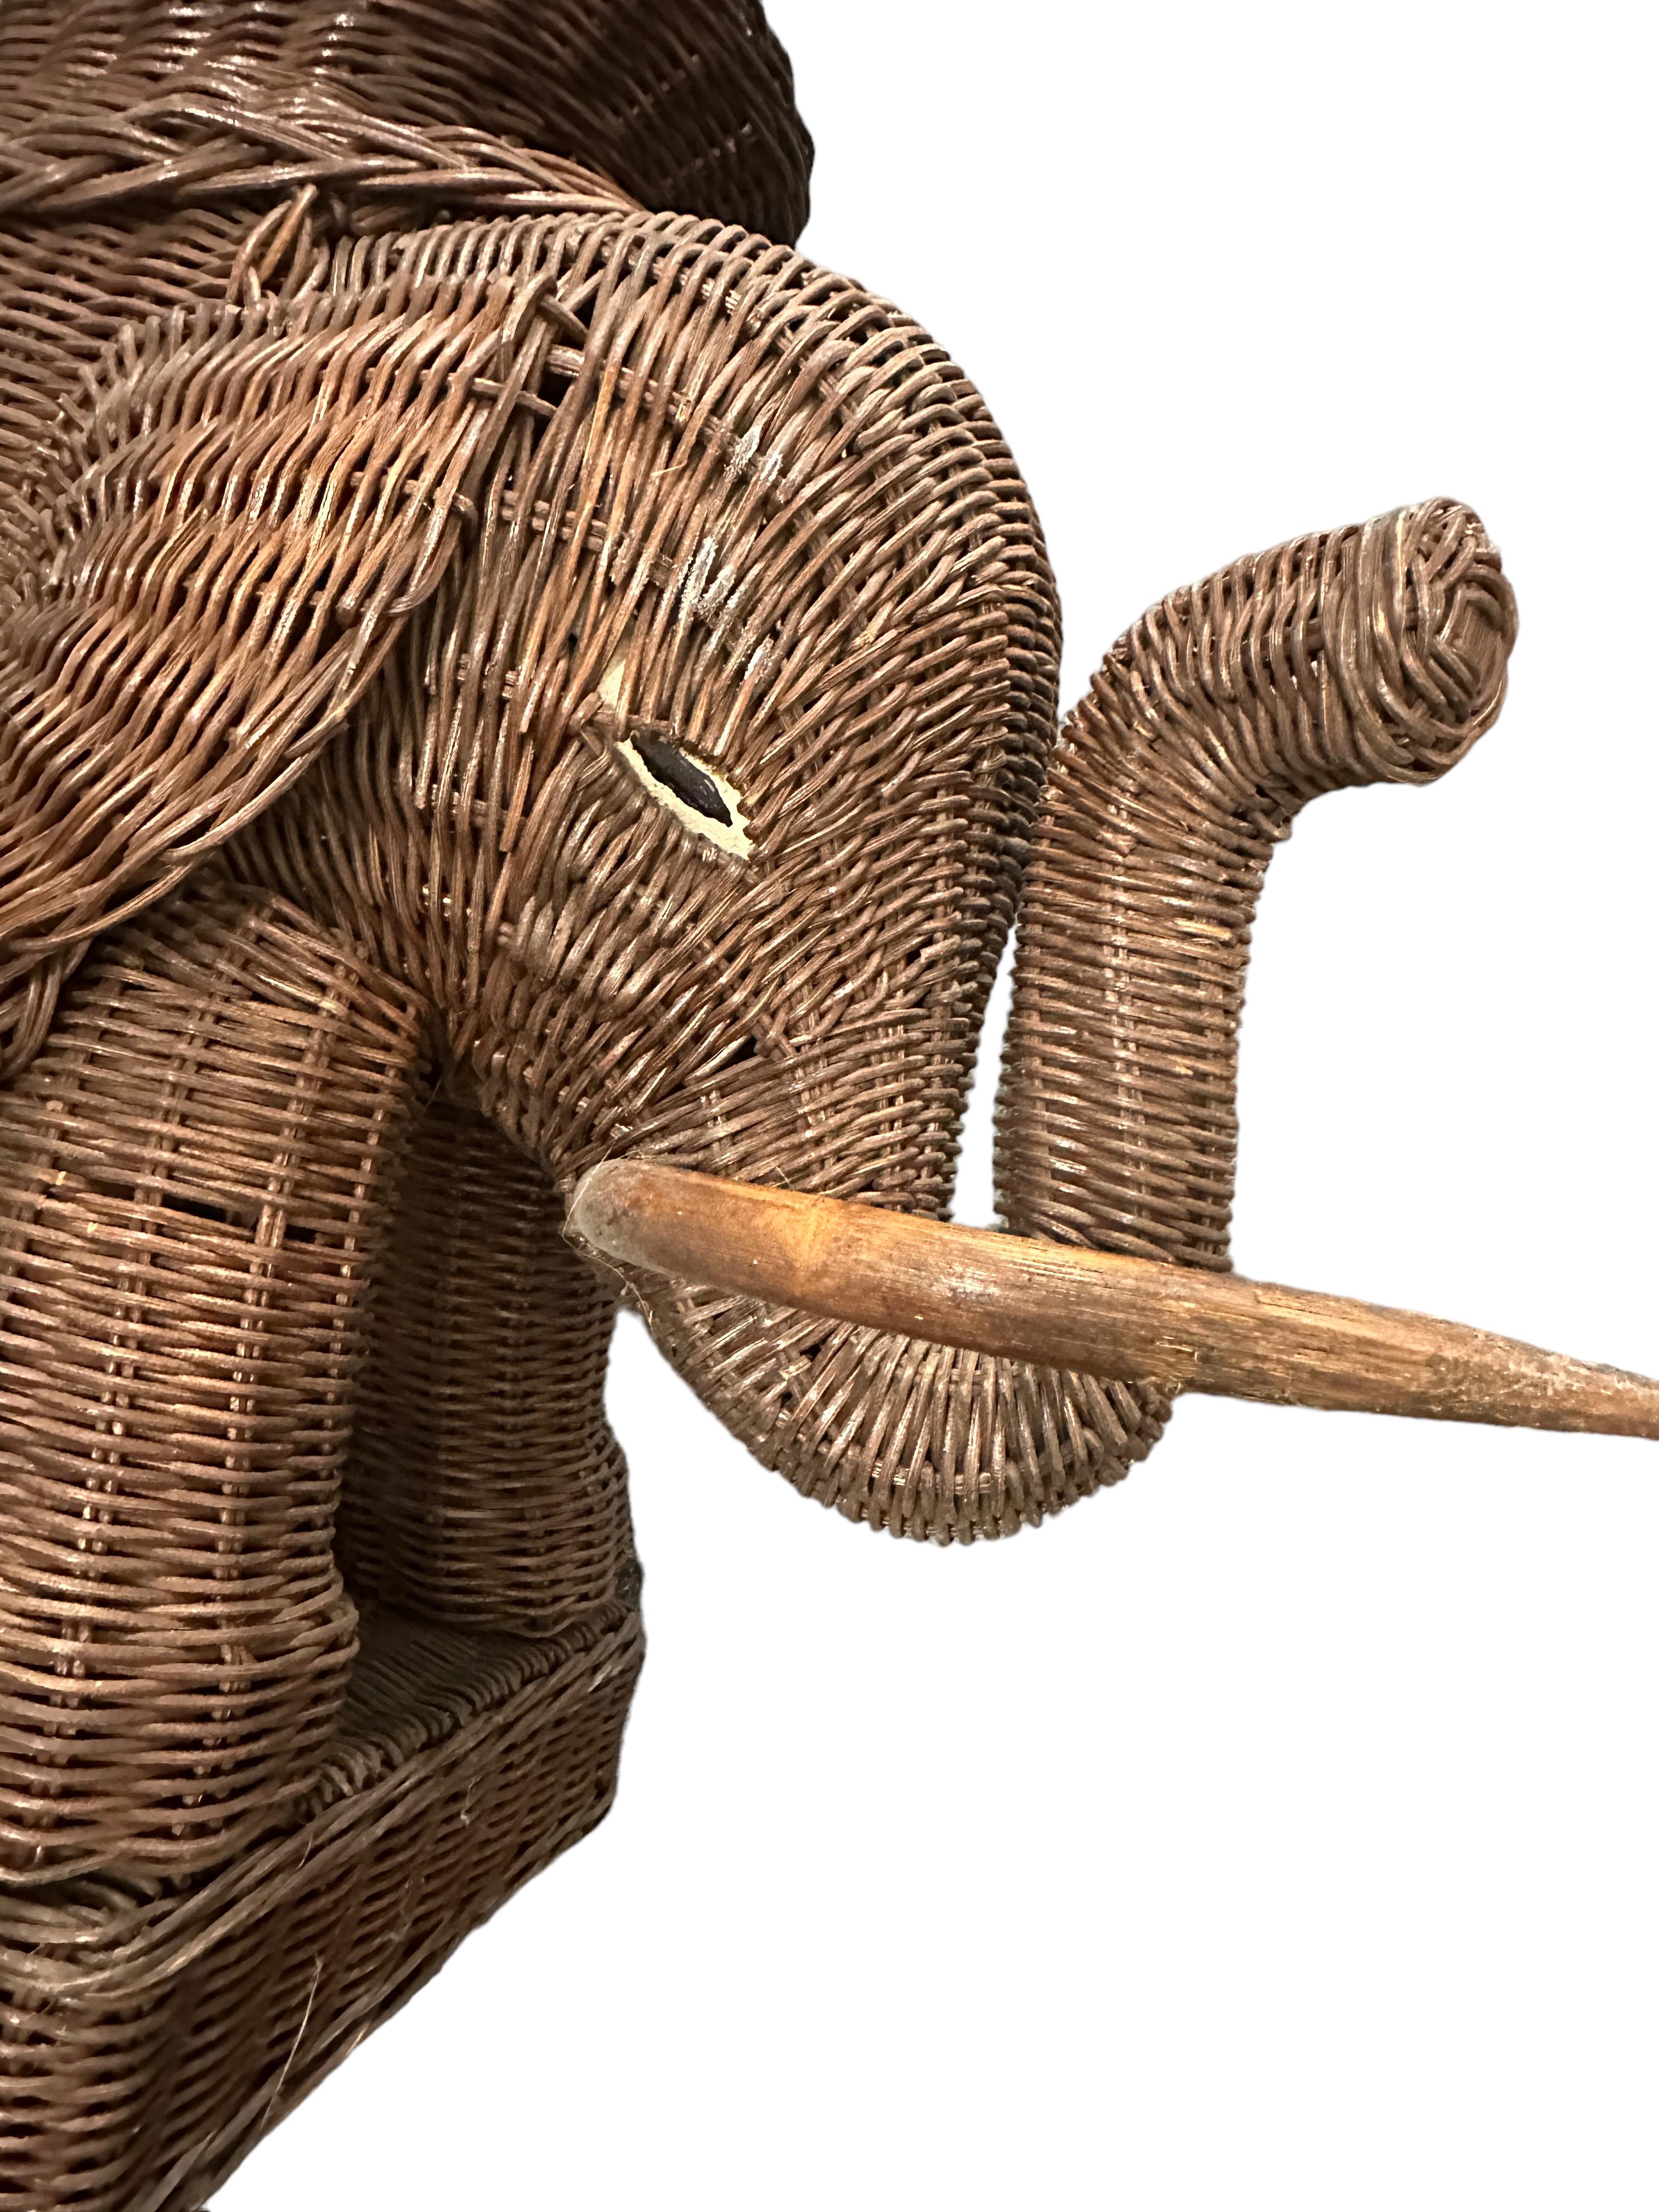 Stunning Rattan Wicker Elephant Side Table with Tray, France, 1960s For Sale 4